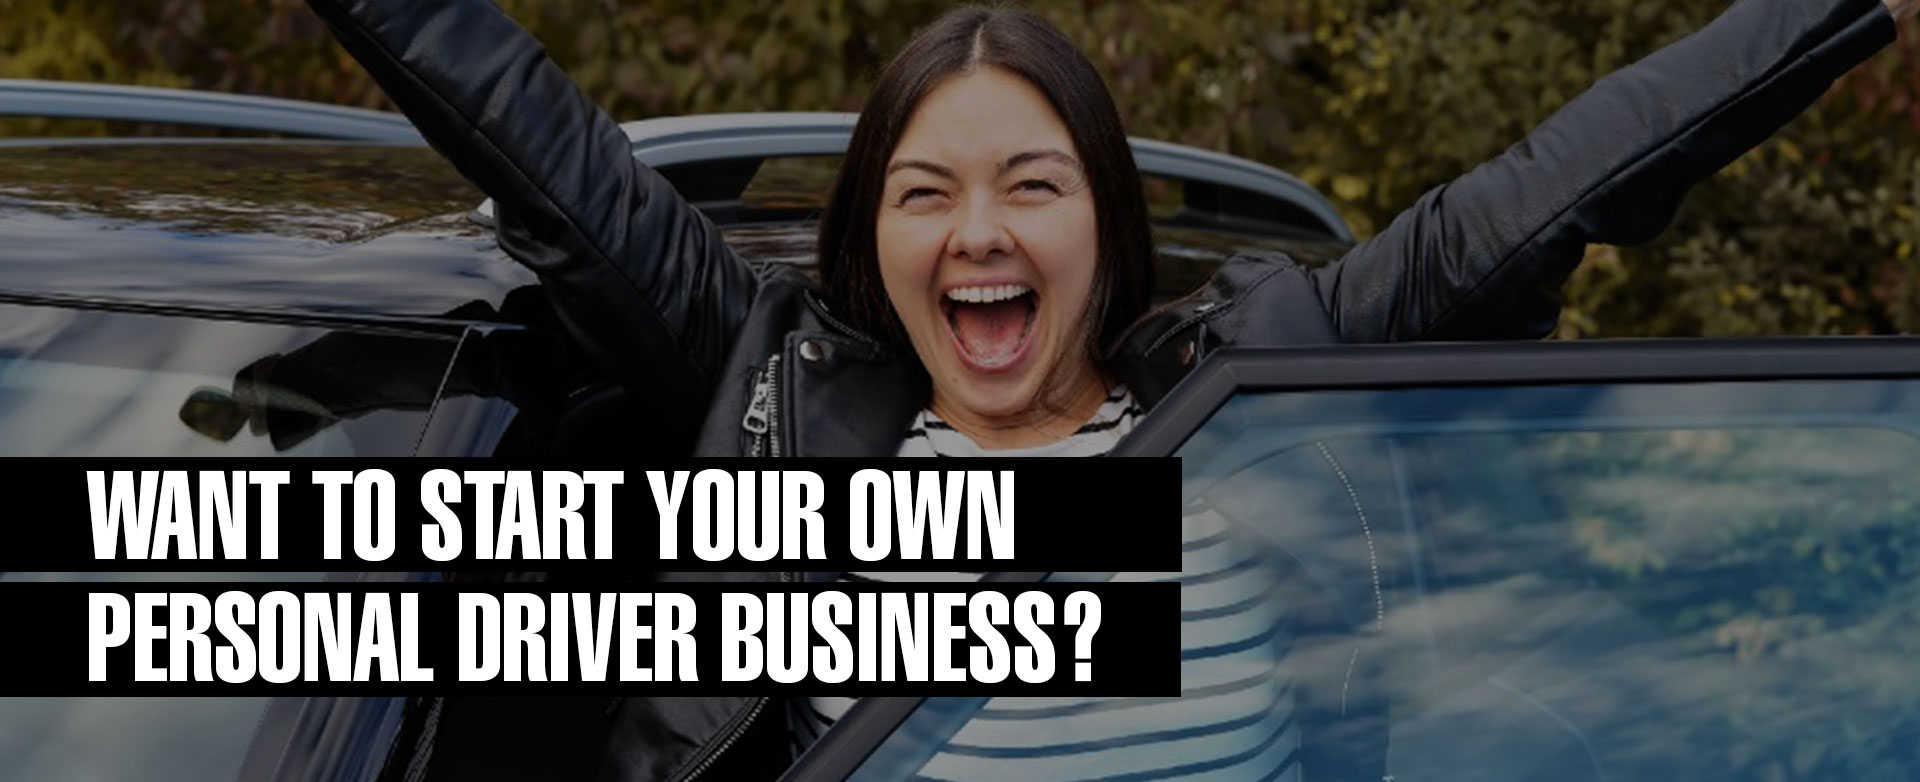 MyPariotsNetwork-Want To Start Your Own Personal Driver Business? Learn More About How You Can!